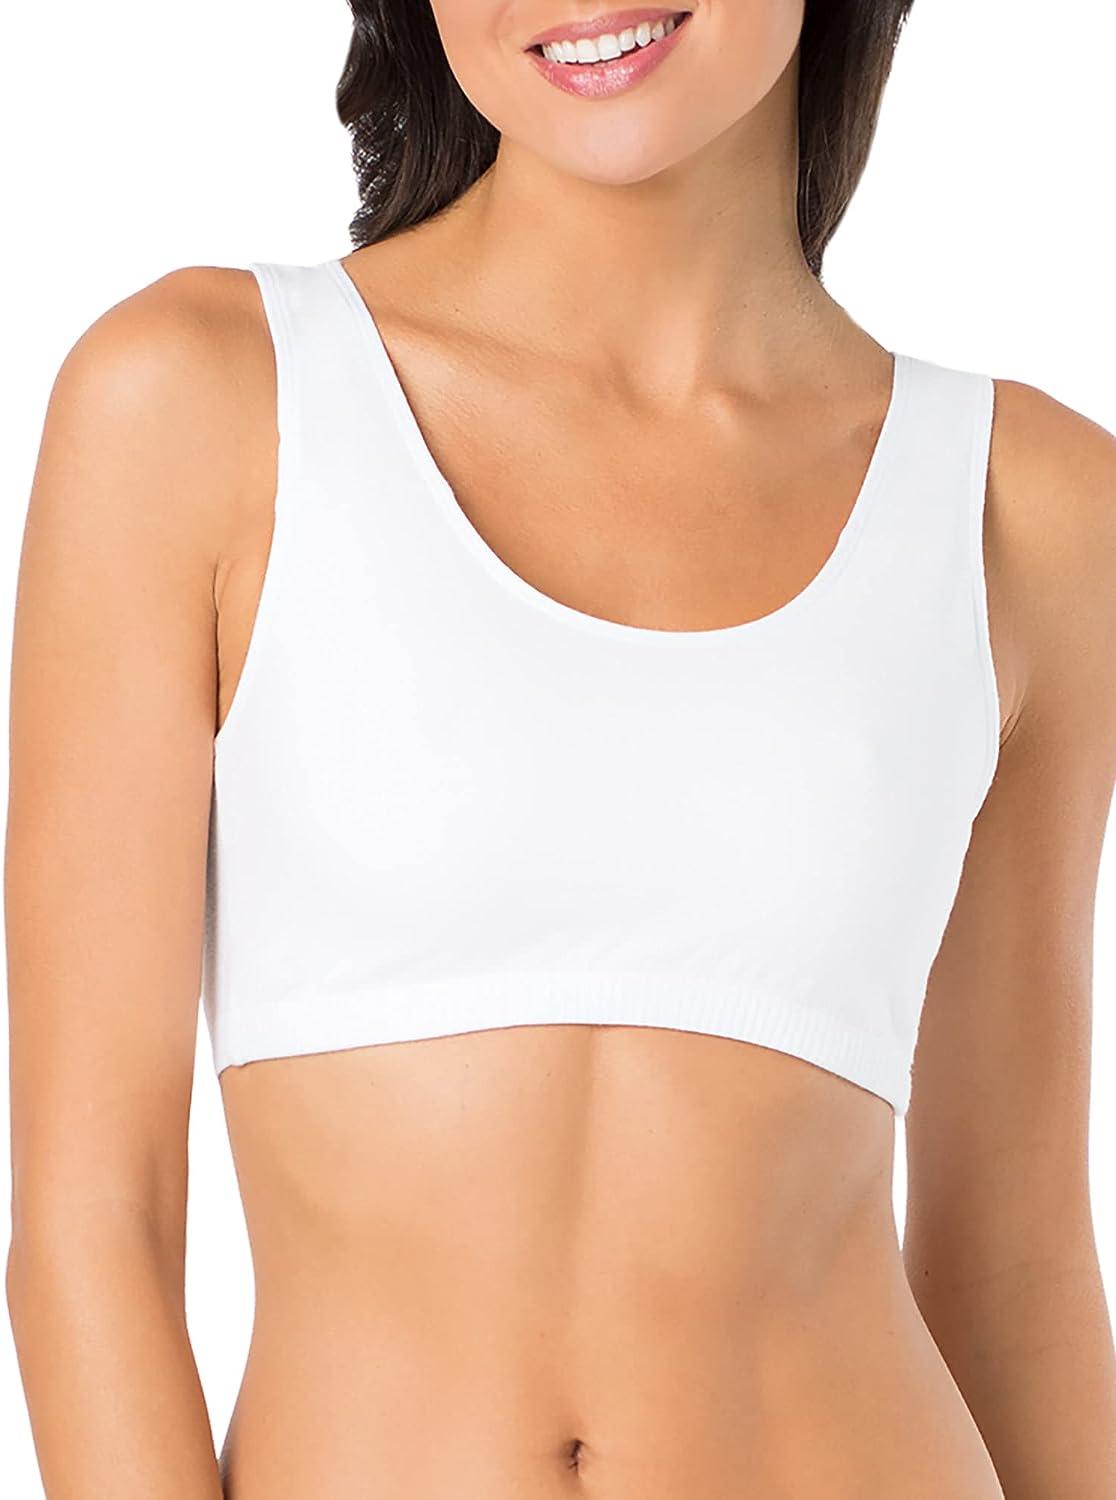 Fruit of the Loom Cotton Sports Bra Size 42 White Stretch Racerback